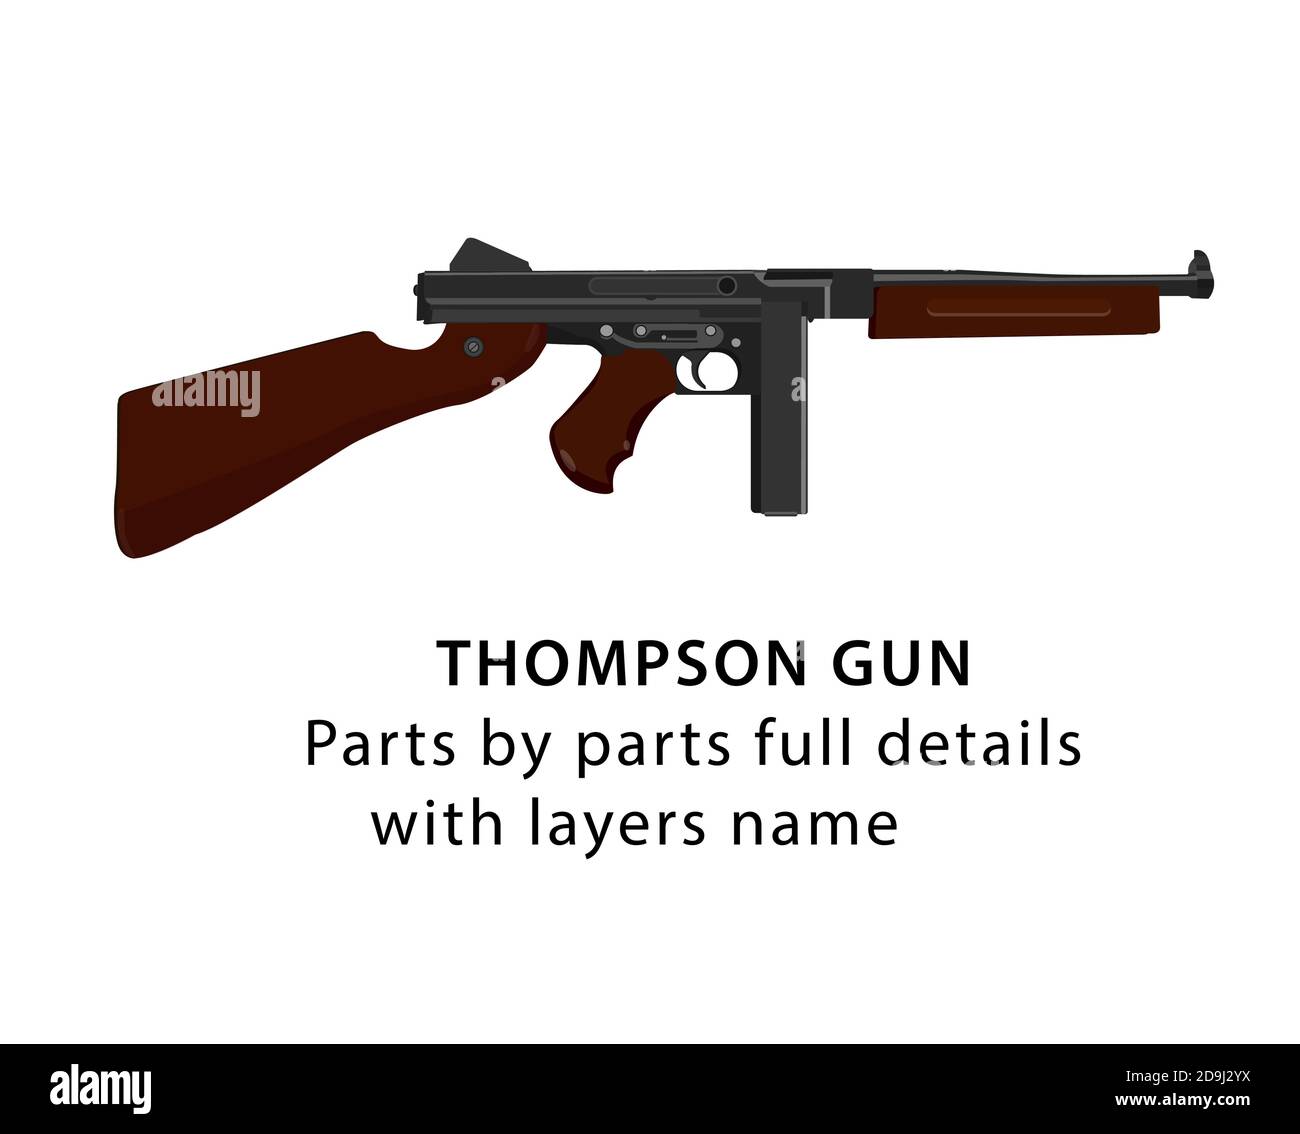 American WW2 Thompson gun vector | WW2 gun full details and parts by parts with layers name. This can help you to animated like magazine reloading. Stock Vector